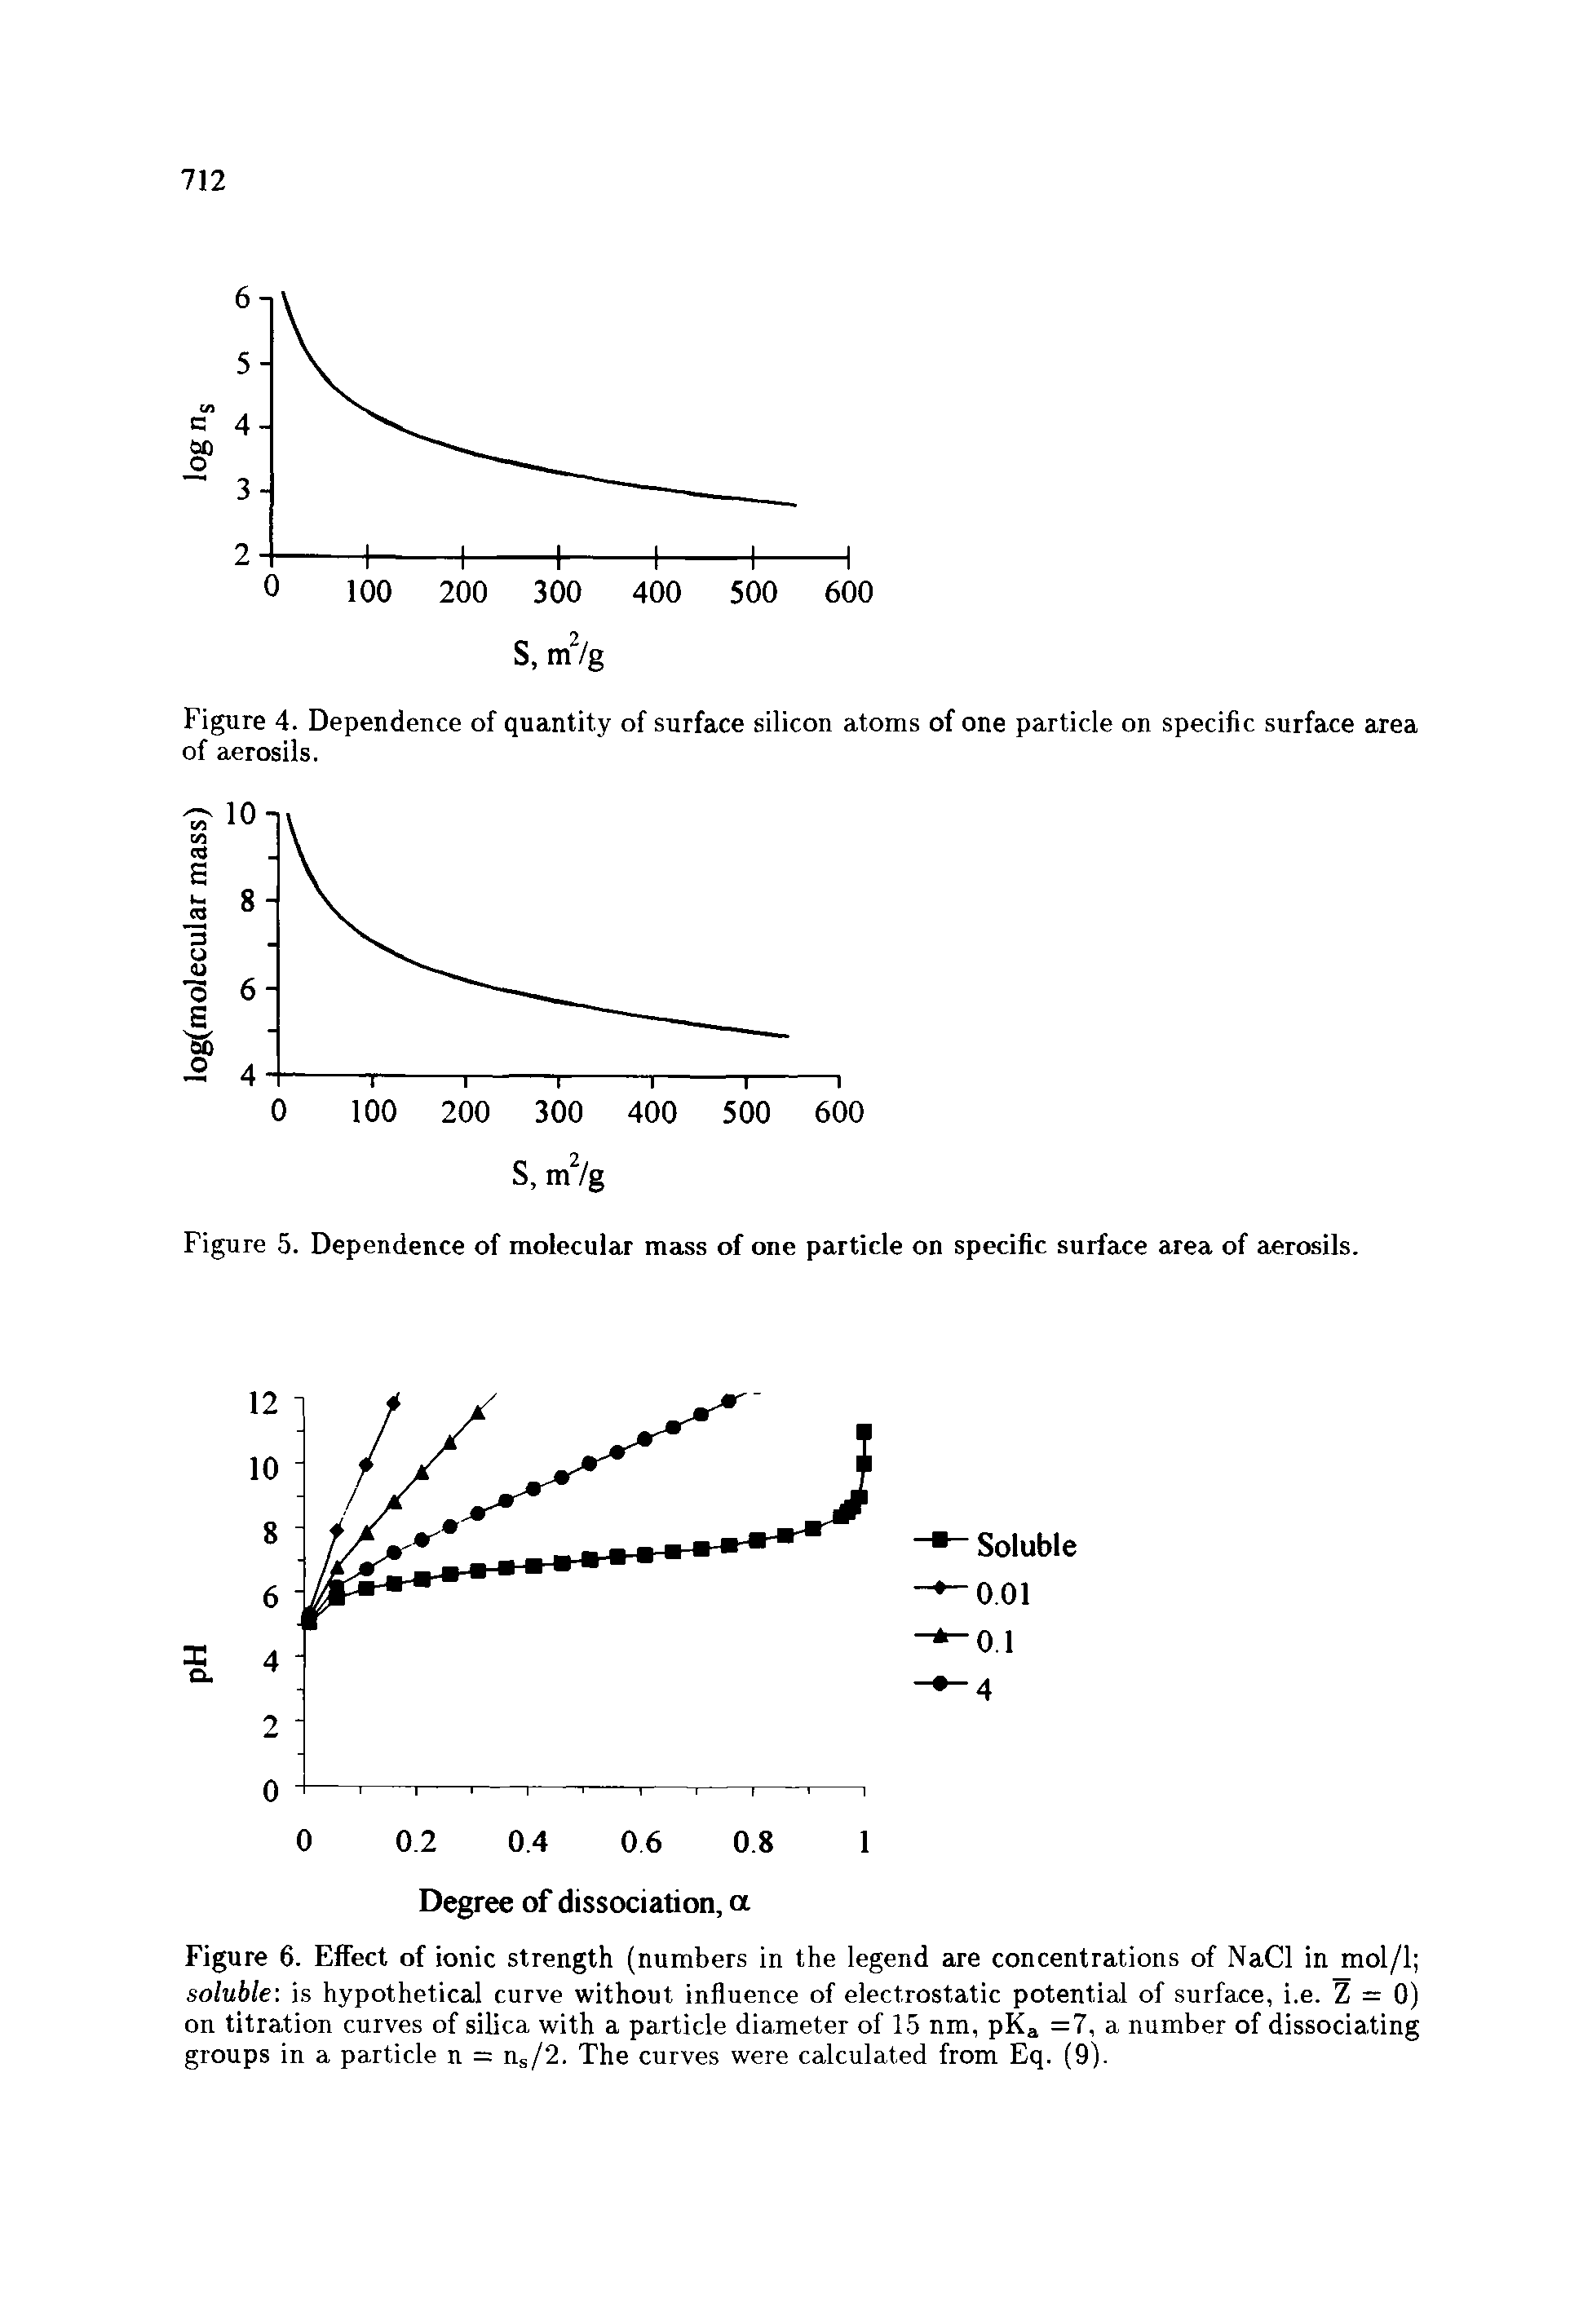 Figure 6. Effect of ionic strength (numbers in the legend are concentrations of NaCl in mol/1 soluble is hypothetical curve without influence of electrostatic potential of surface, i.e. Z = 0) on titration curves of silica with a particle diameter of 15 nm, pKa =7, a number of dissociating groups in a particle n = ns/2. The curves were calculated from Eq. (9).